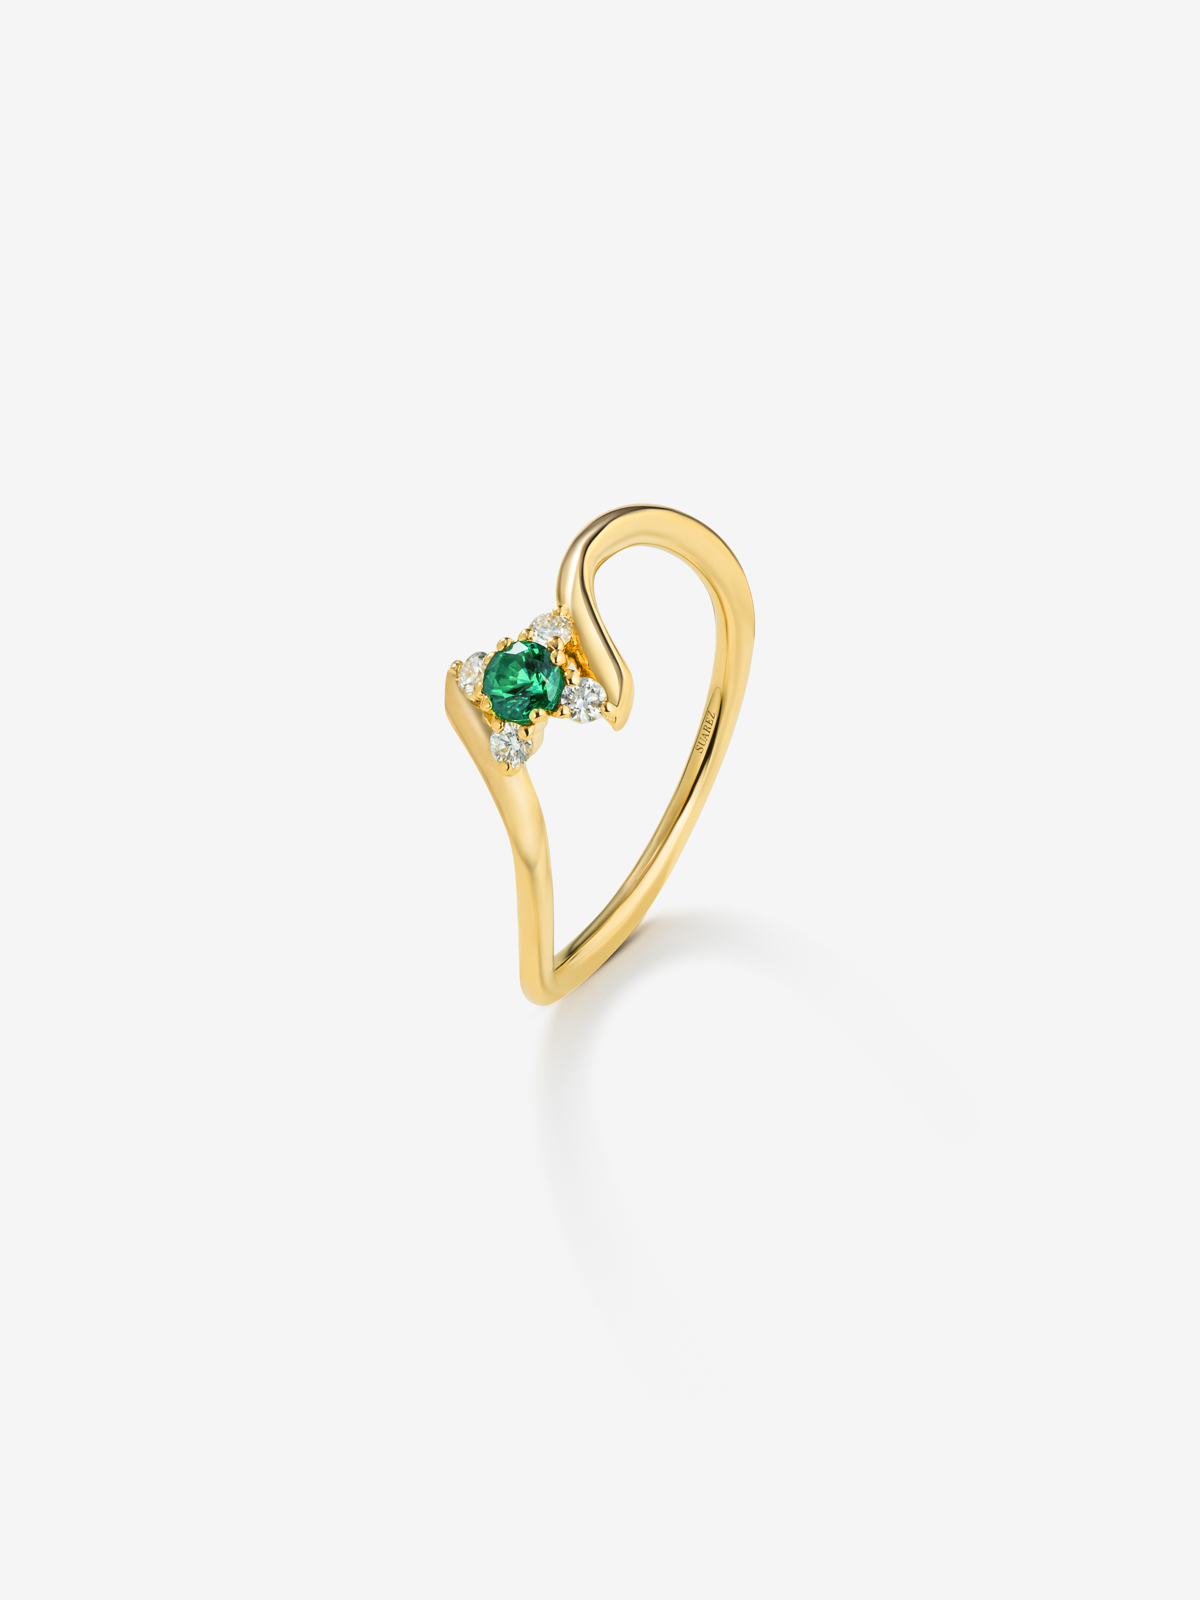 18K yellow gold ring with emerald and diamonds.